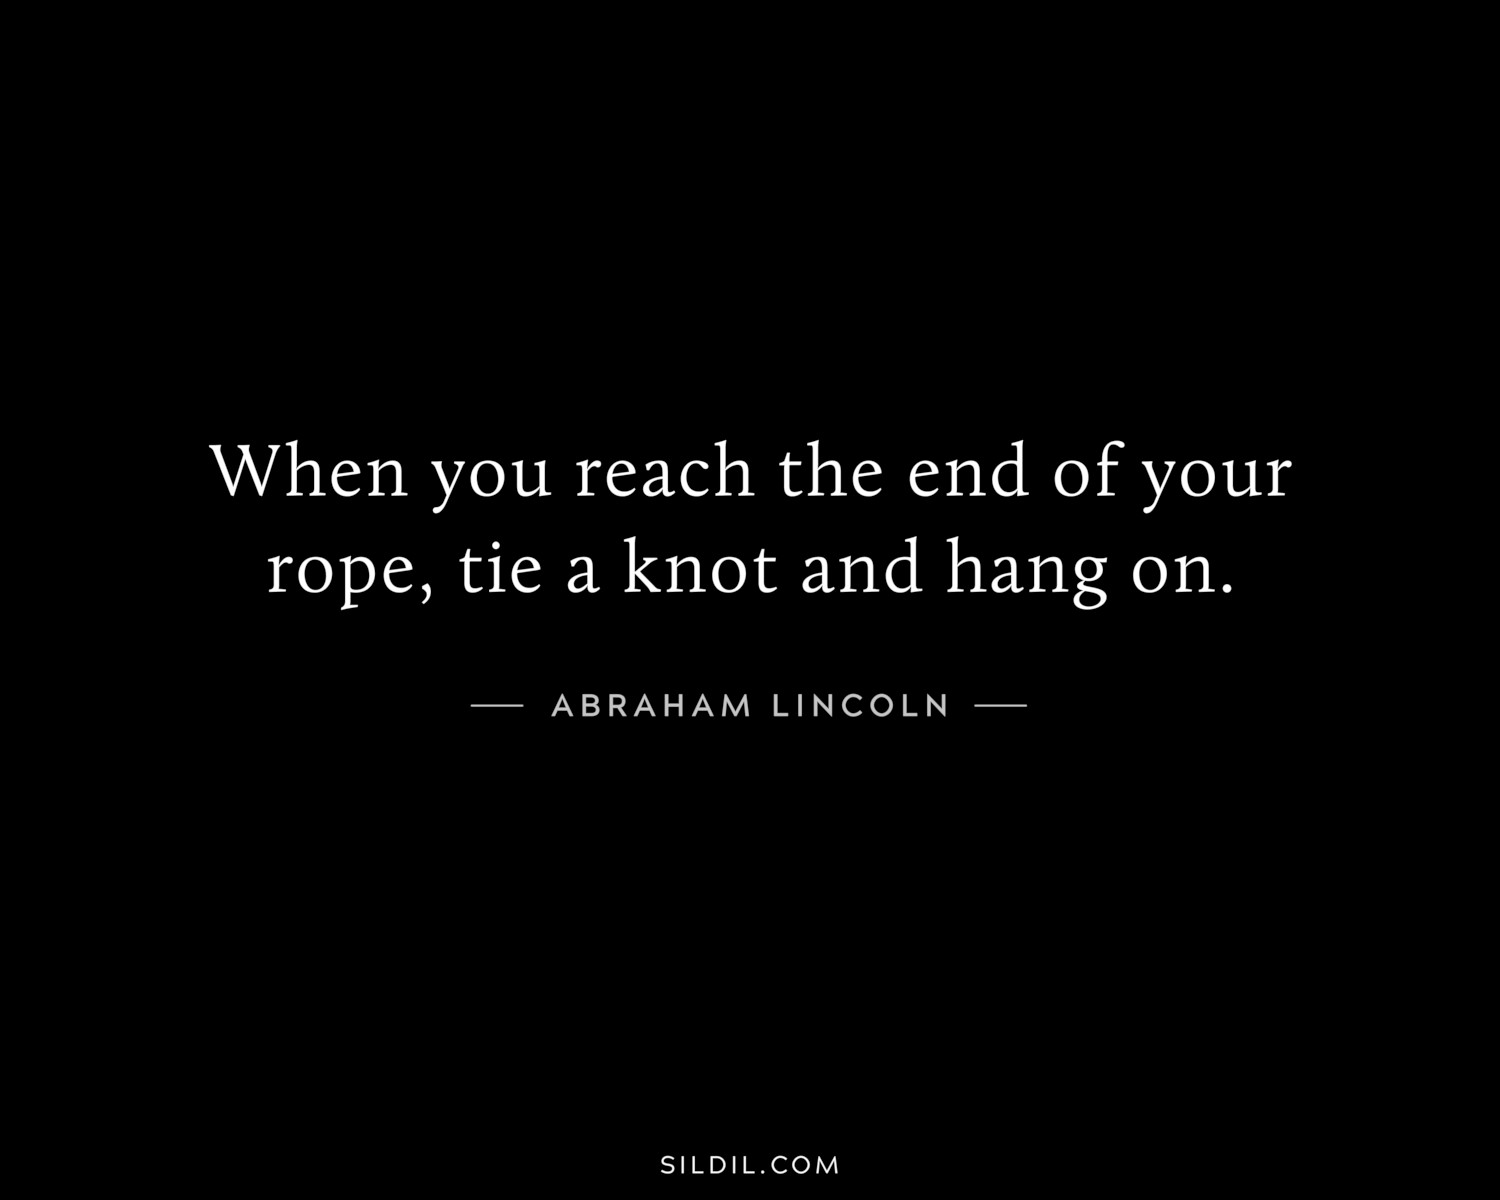 When you reach the end of your rope, tie a knot and hang on.